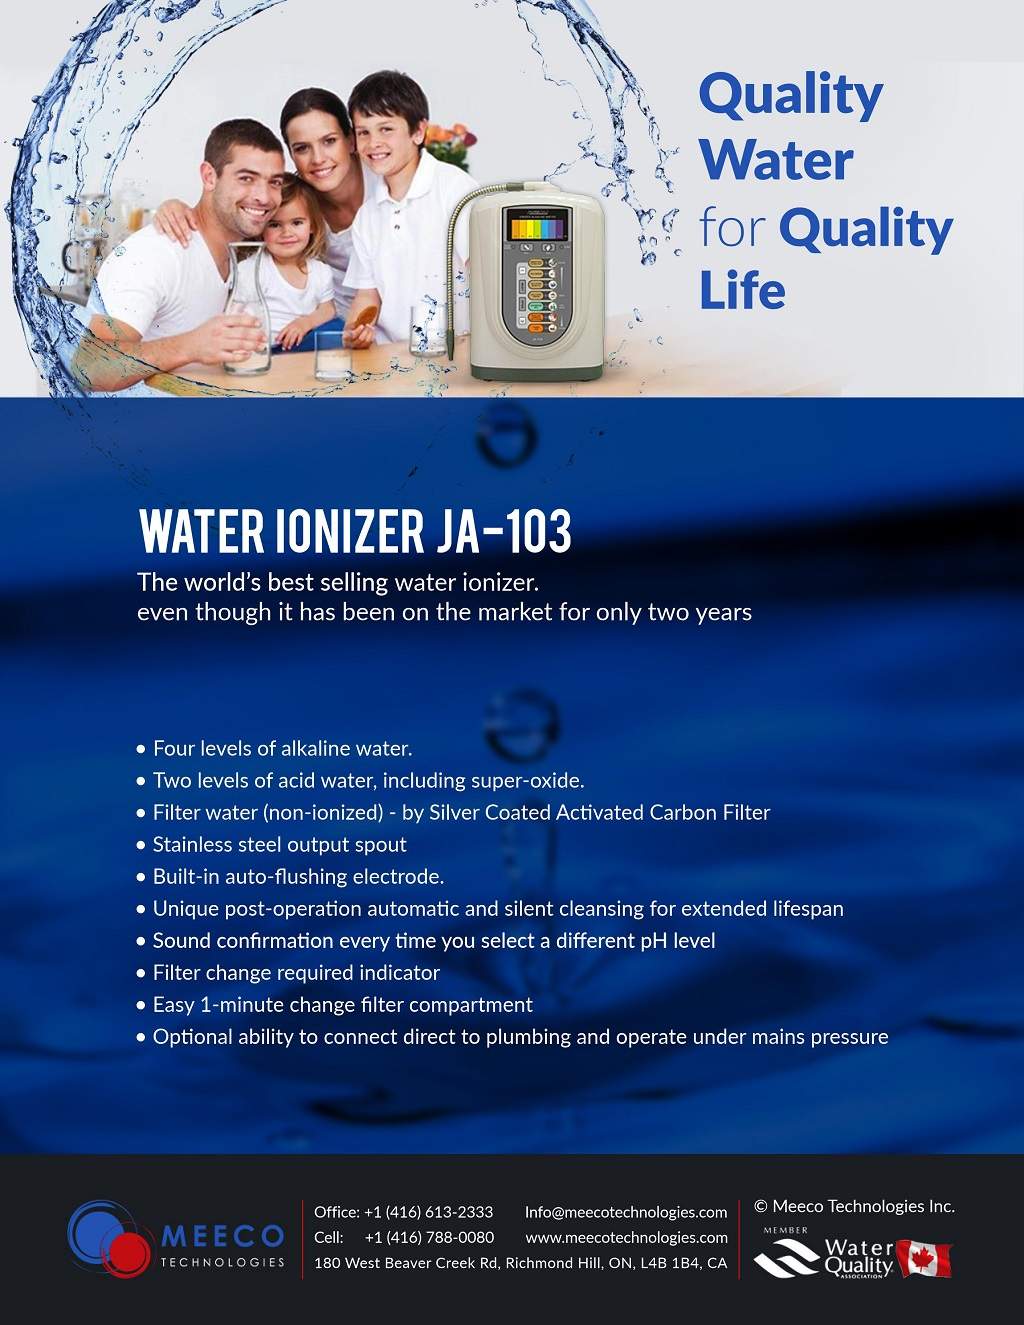 MeecoTechnologie Water Ionizer is currently being manufactured in Taiwan and is one of the best selling water ionizers available in the USA. It had the patent and awards throughout the world (Japan, Taiwan, HK...etc) It is an extremely popular unit because it is an affordable extremely high quality unit.